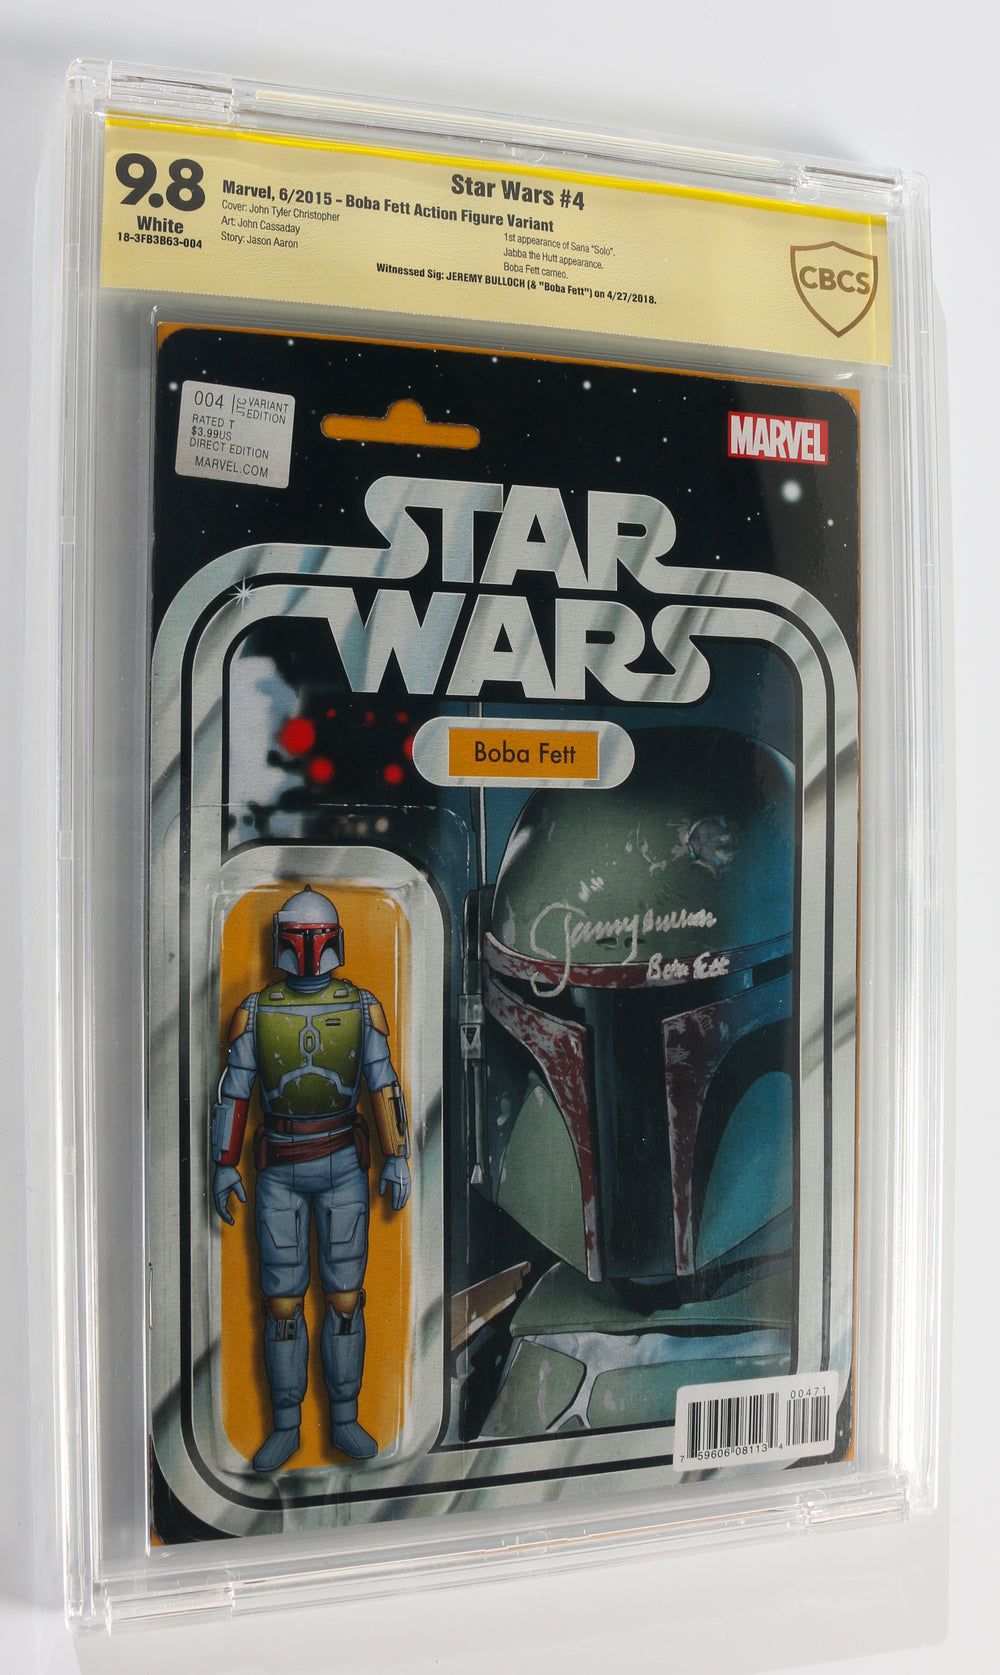 Star Wars #4 Action Figure Variant - Signed by Jeremy Bulloch as Boba Fett (CBCS Witnessed Signature 9.8) 2015